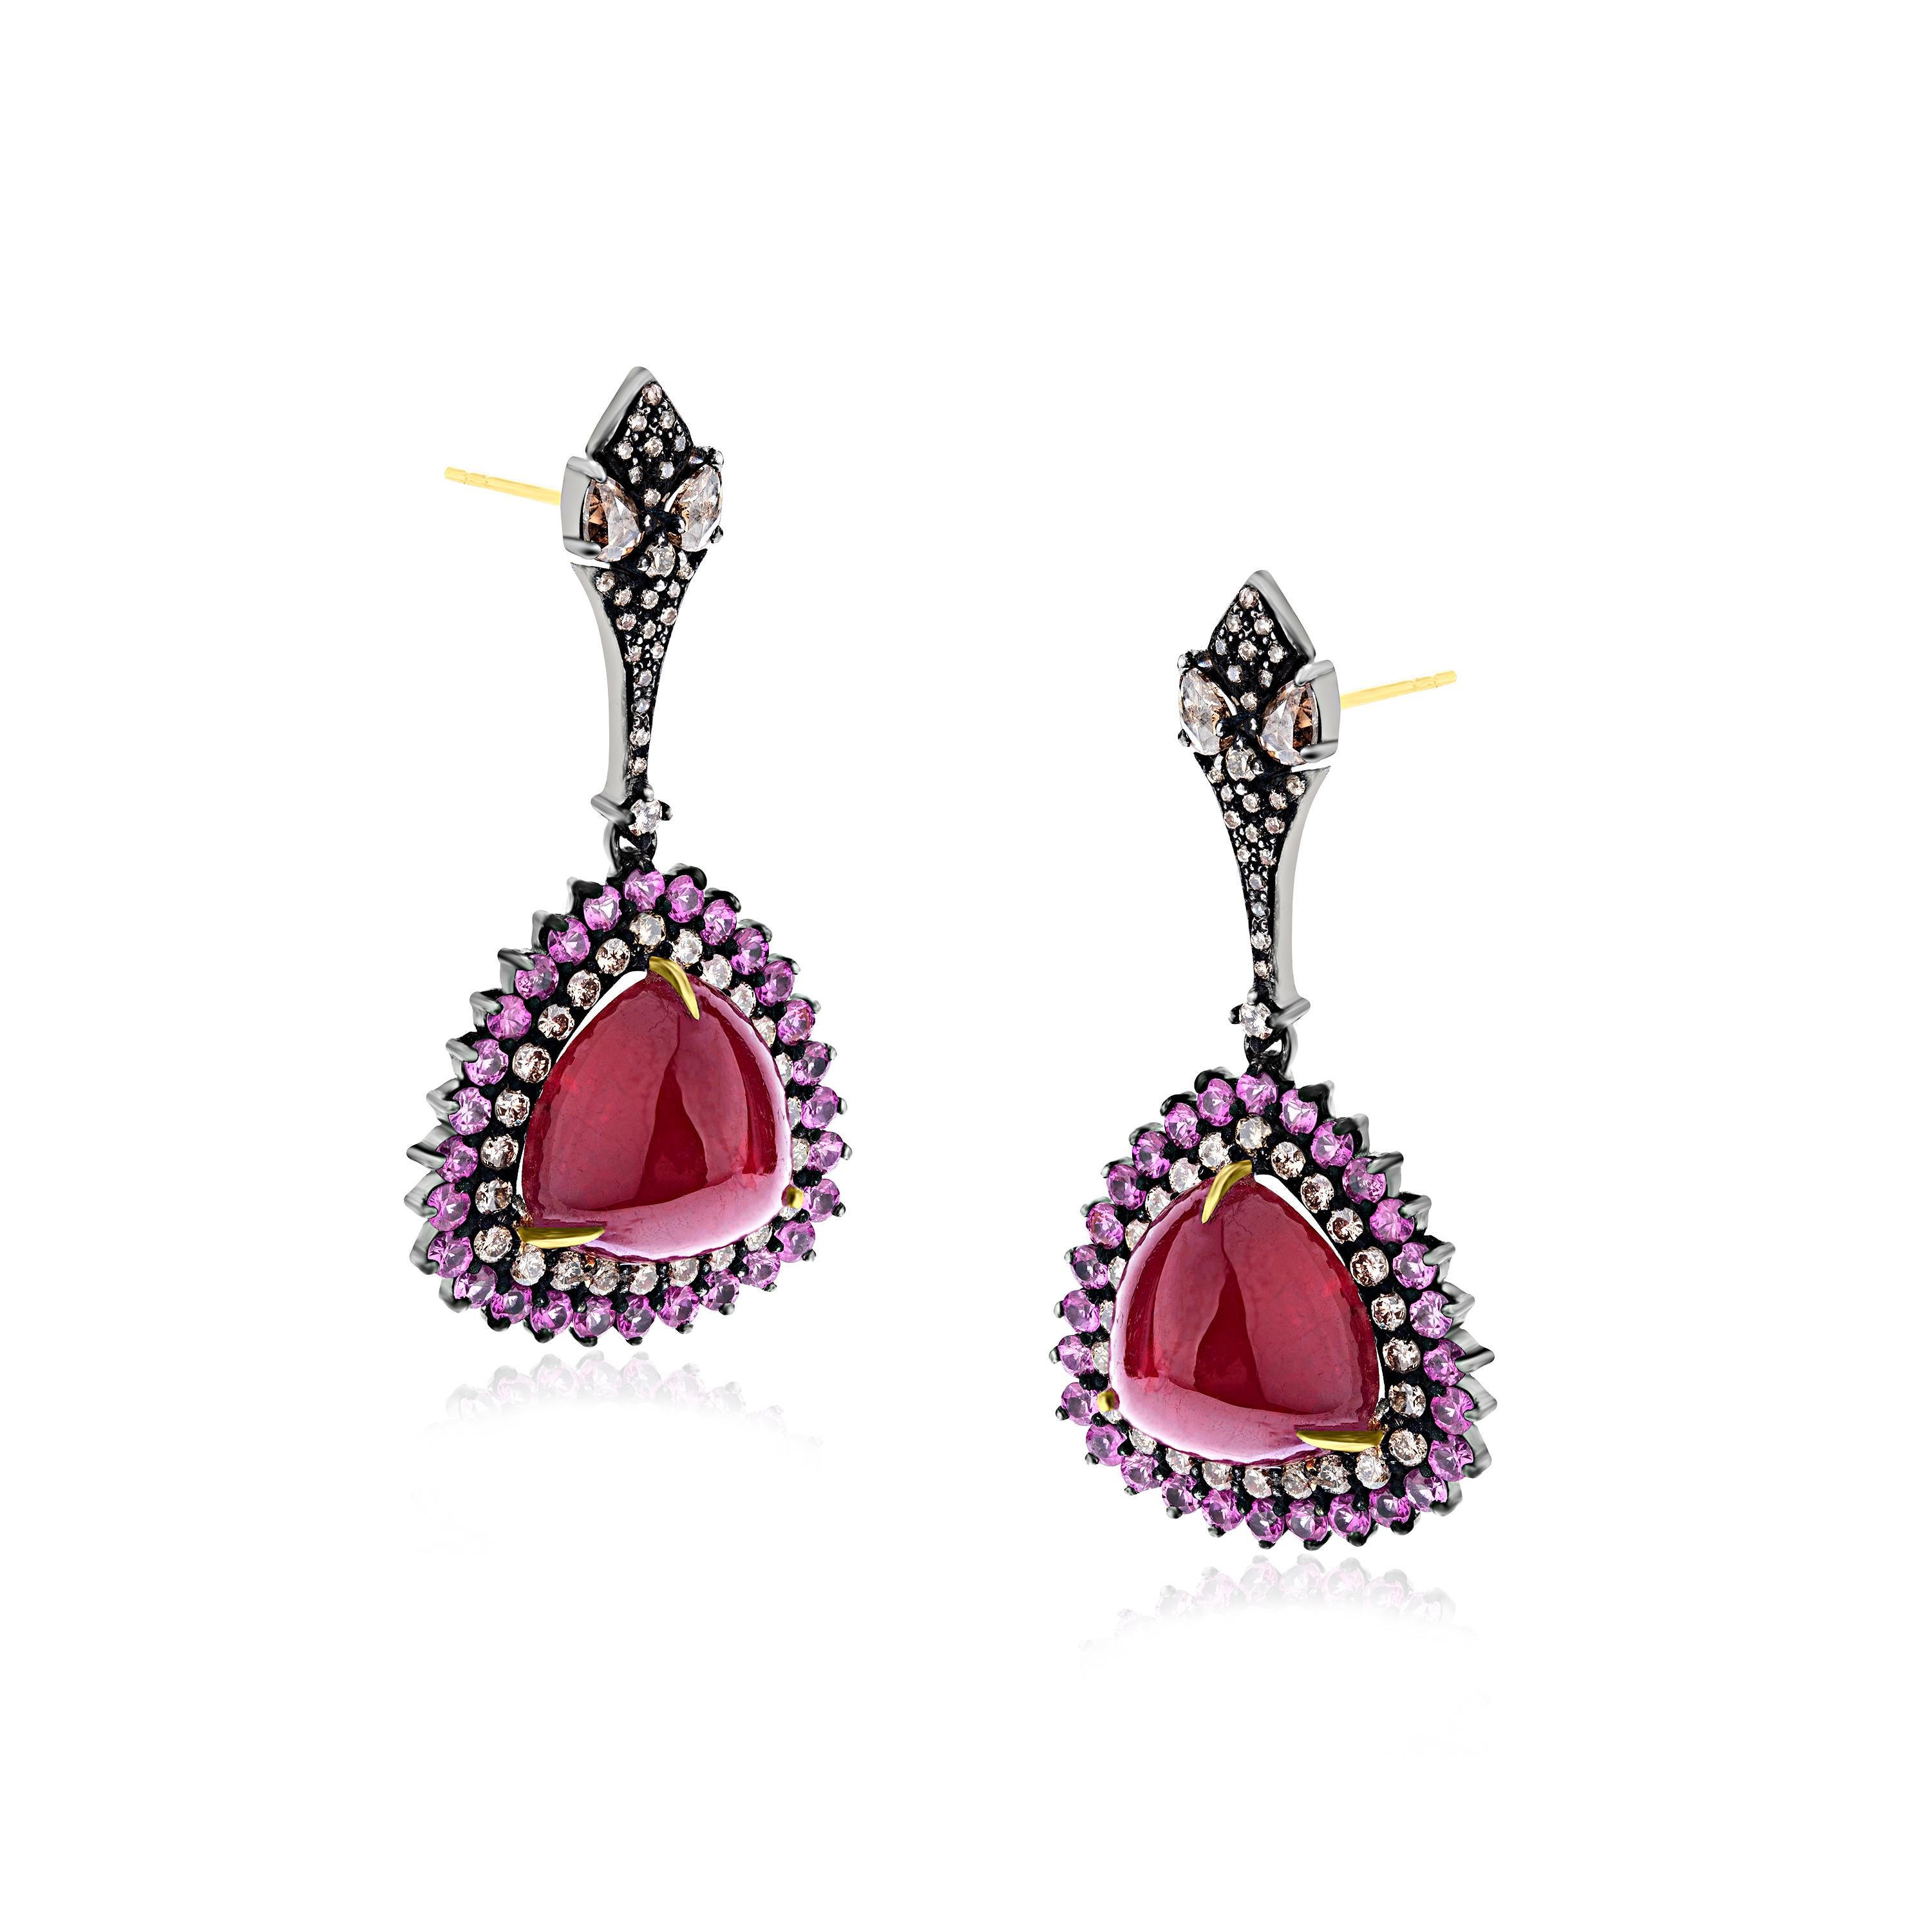 This Gemistry, dazzling earrings of pink hue are manifested on an 18K/925 White & Black Rhodium and Sterling Silver. Trillion cut Ruby drops in diamond and Pink sapphire halos add glamour to this vibrant dangle earring. The colorful pair of